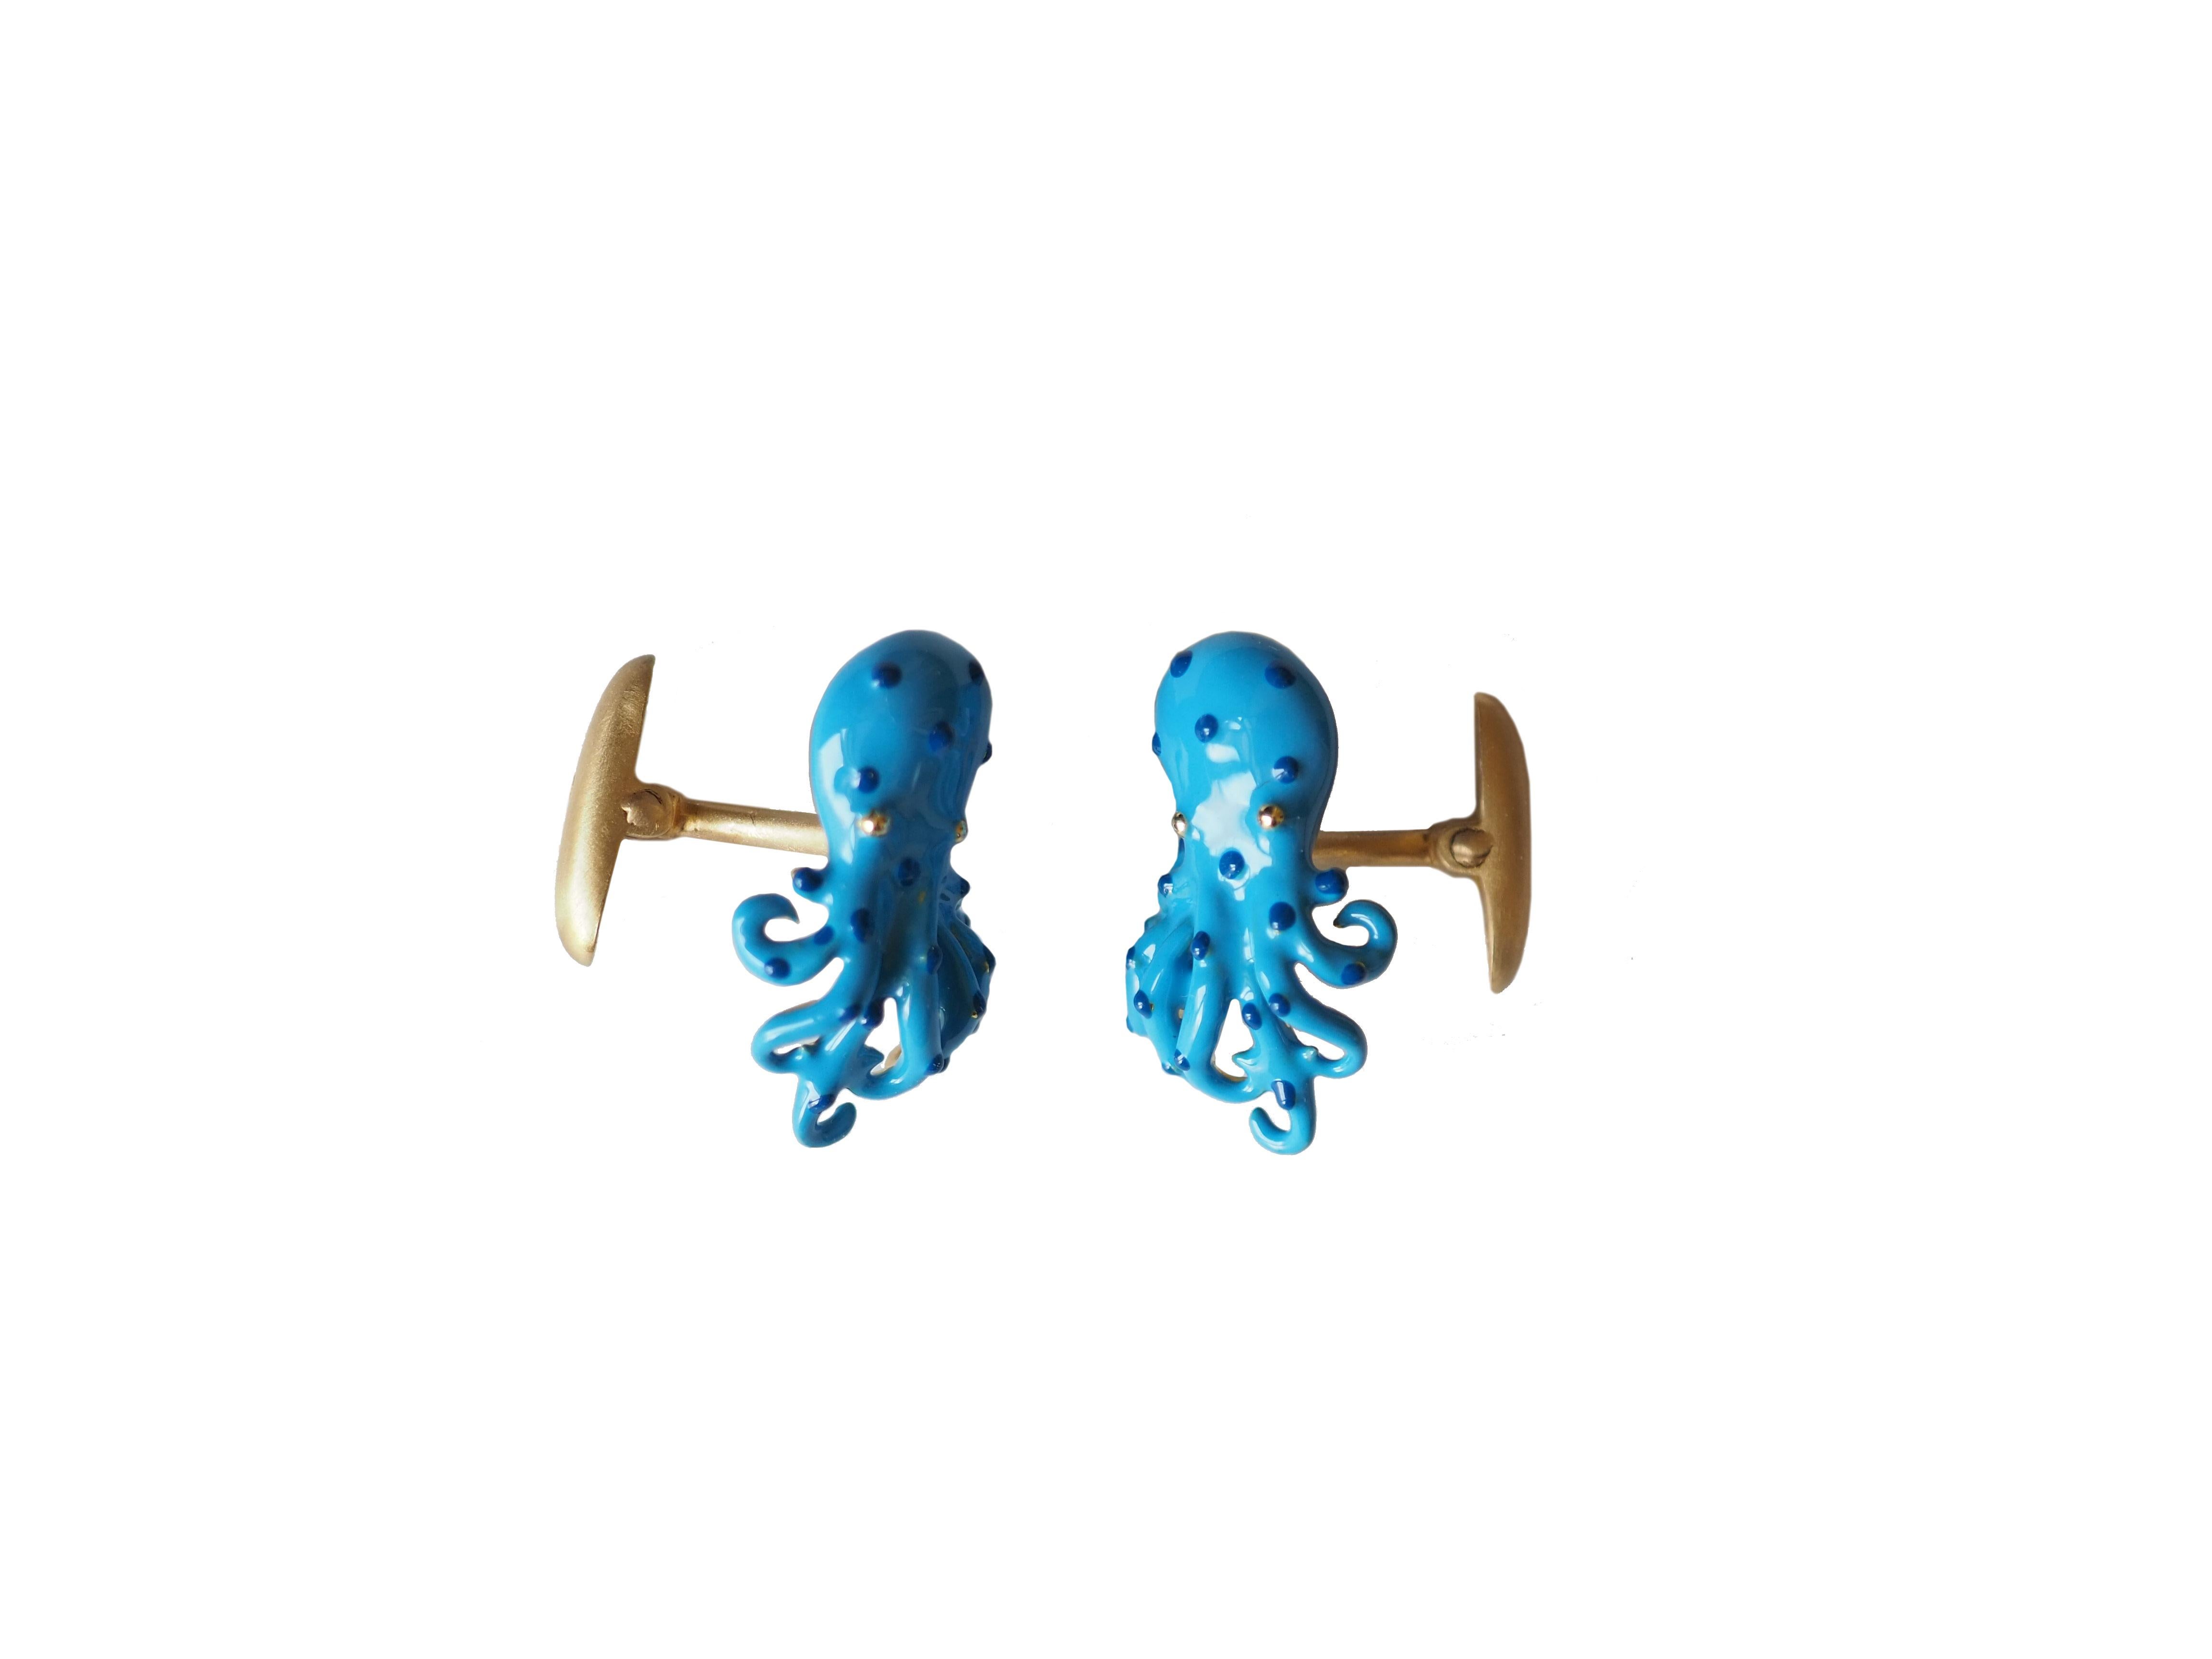 Octopus shape cufflinks  18 kt Gold gr 16,80, Enamel, hand made.
All Giulia Colussi jewelry is new and has never been previously owned or worn. Each item will arrive at your door beautifully gift wrapped in our boxes, put inside an elegant pouch or